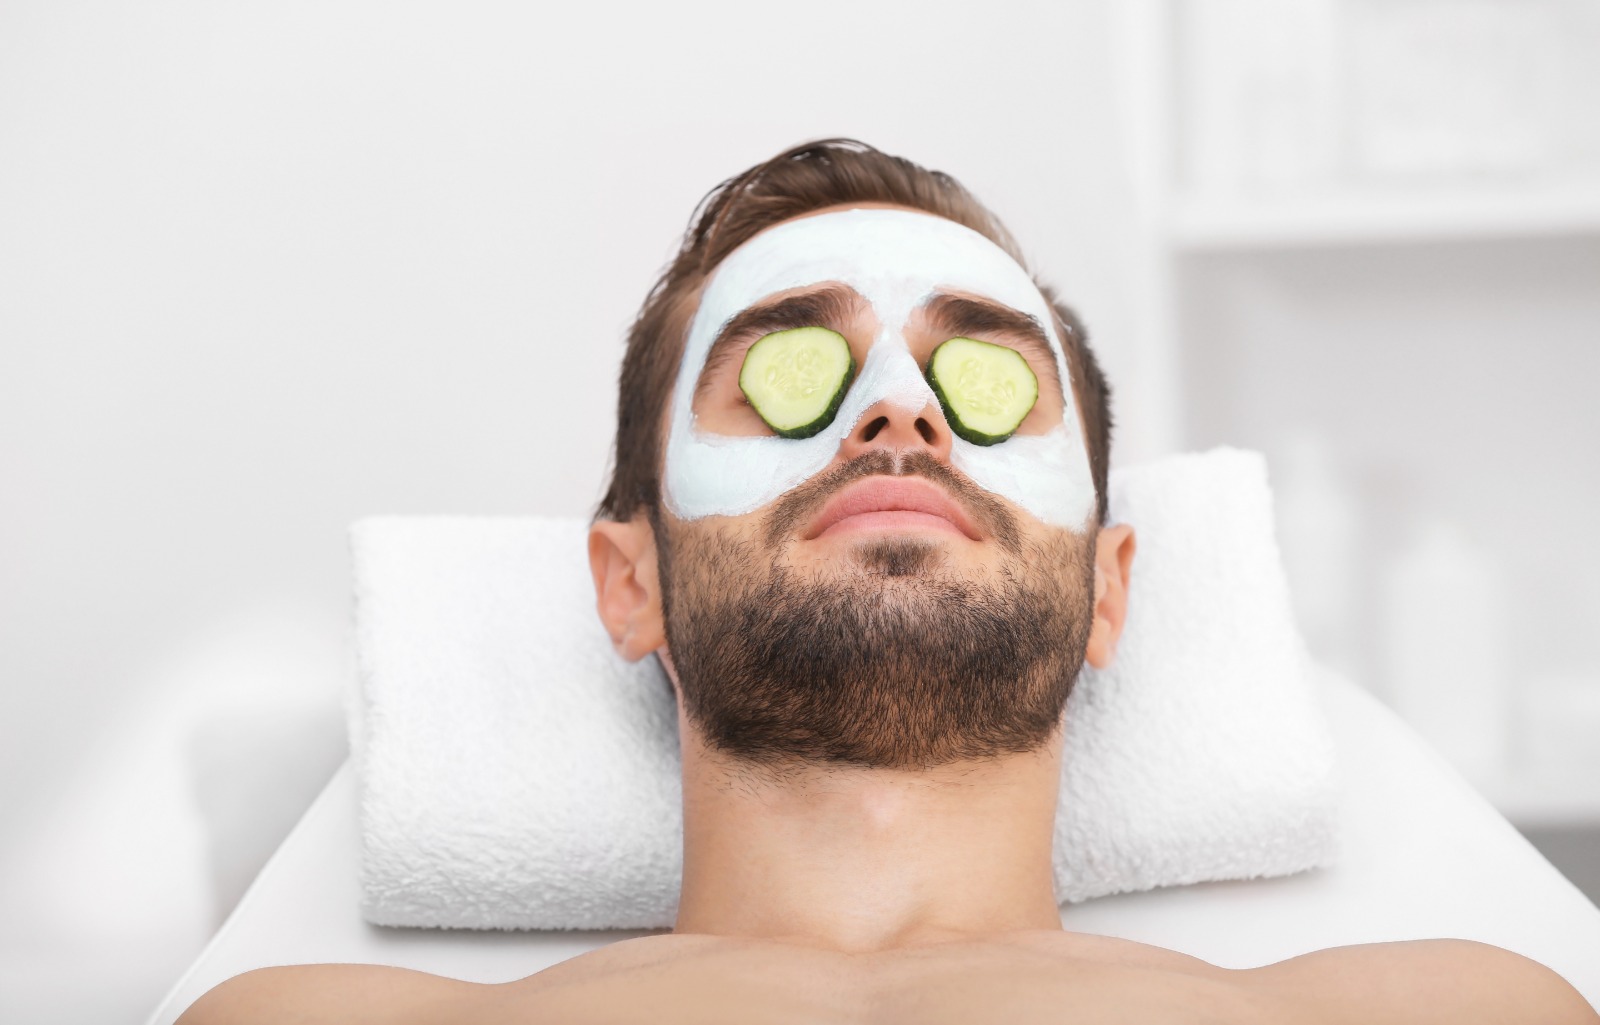 You may have seen people placing chilled cucumbers over closed eyes.